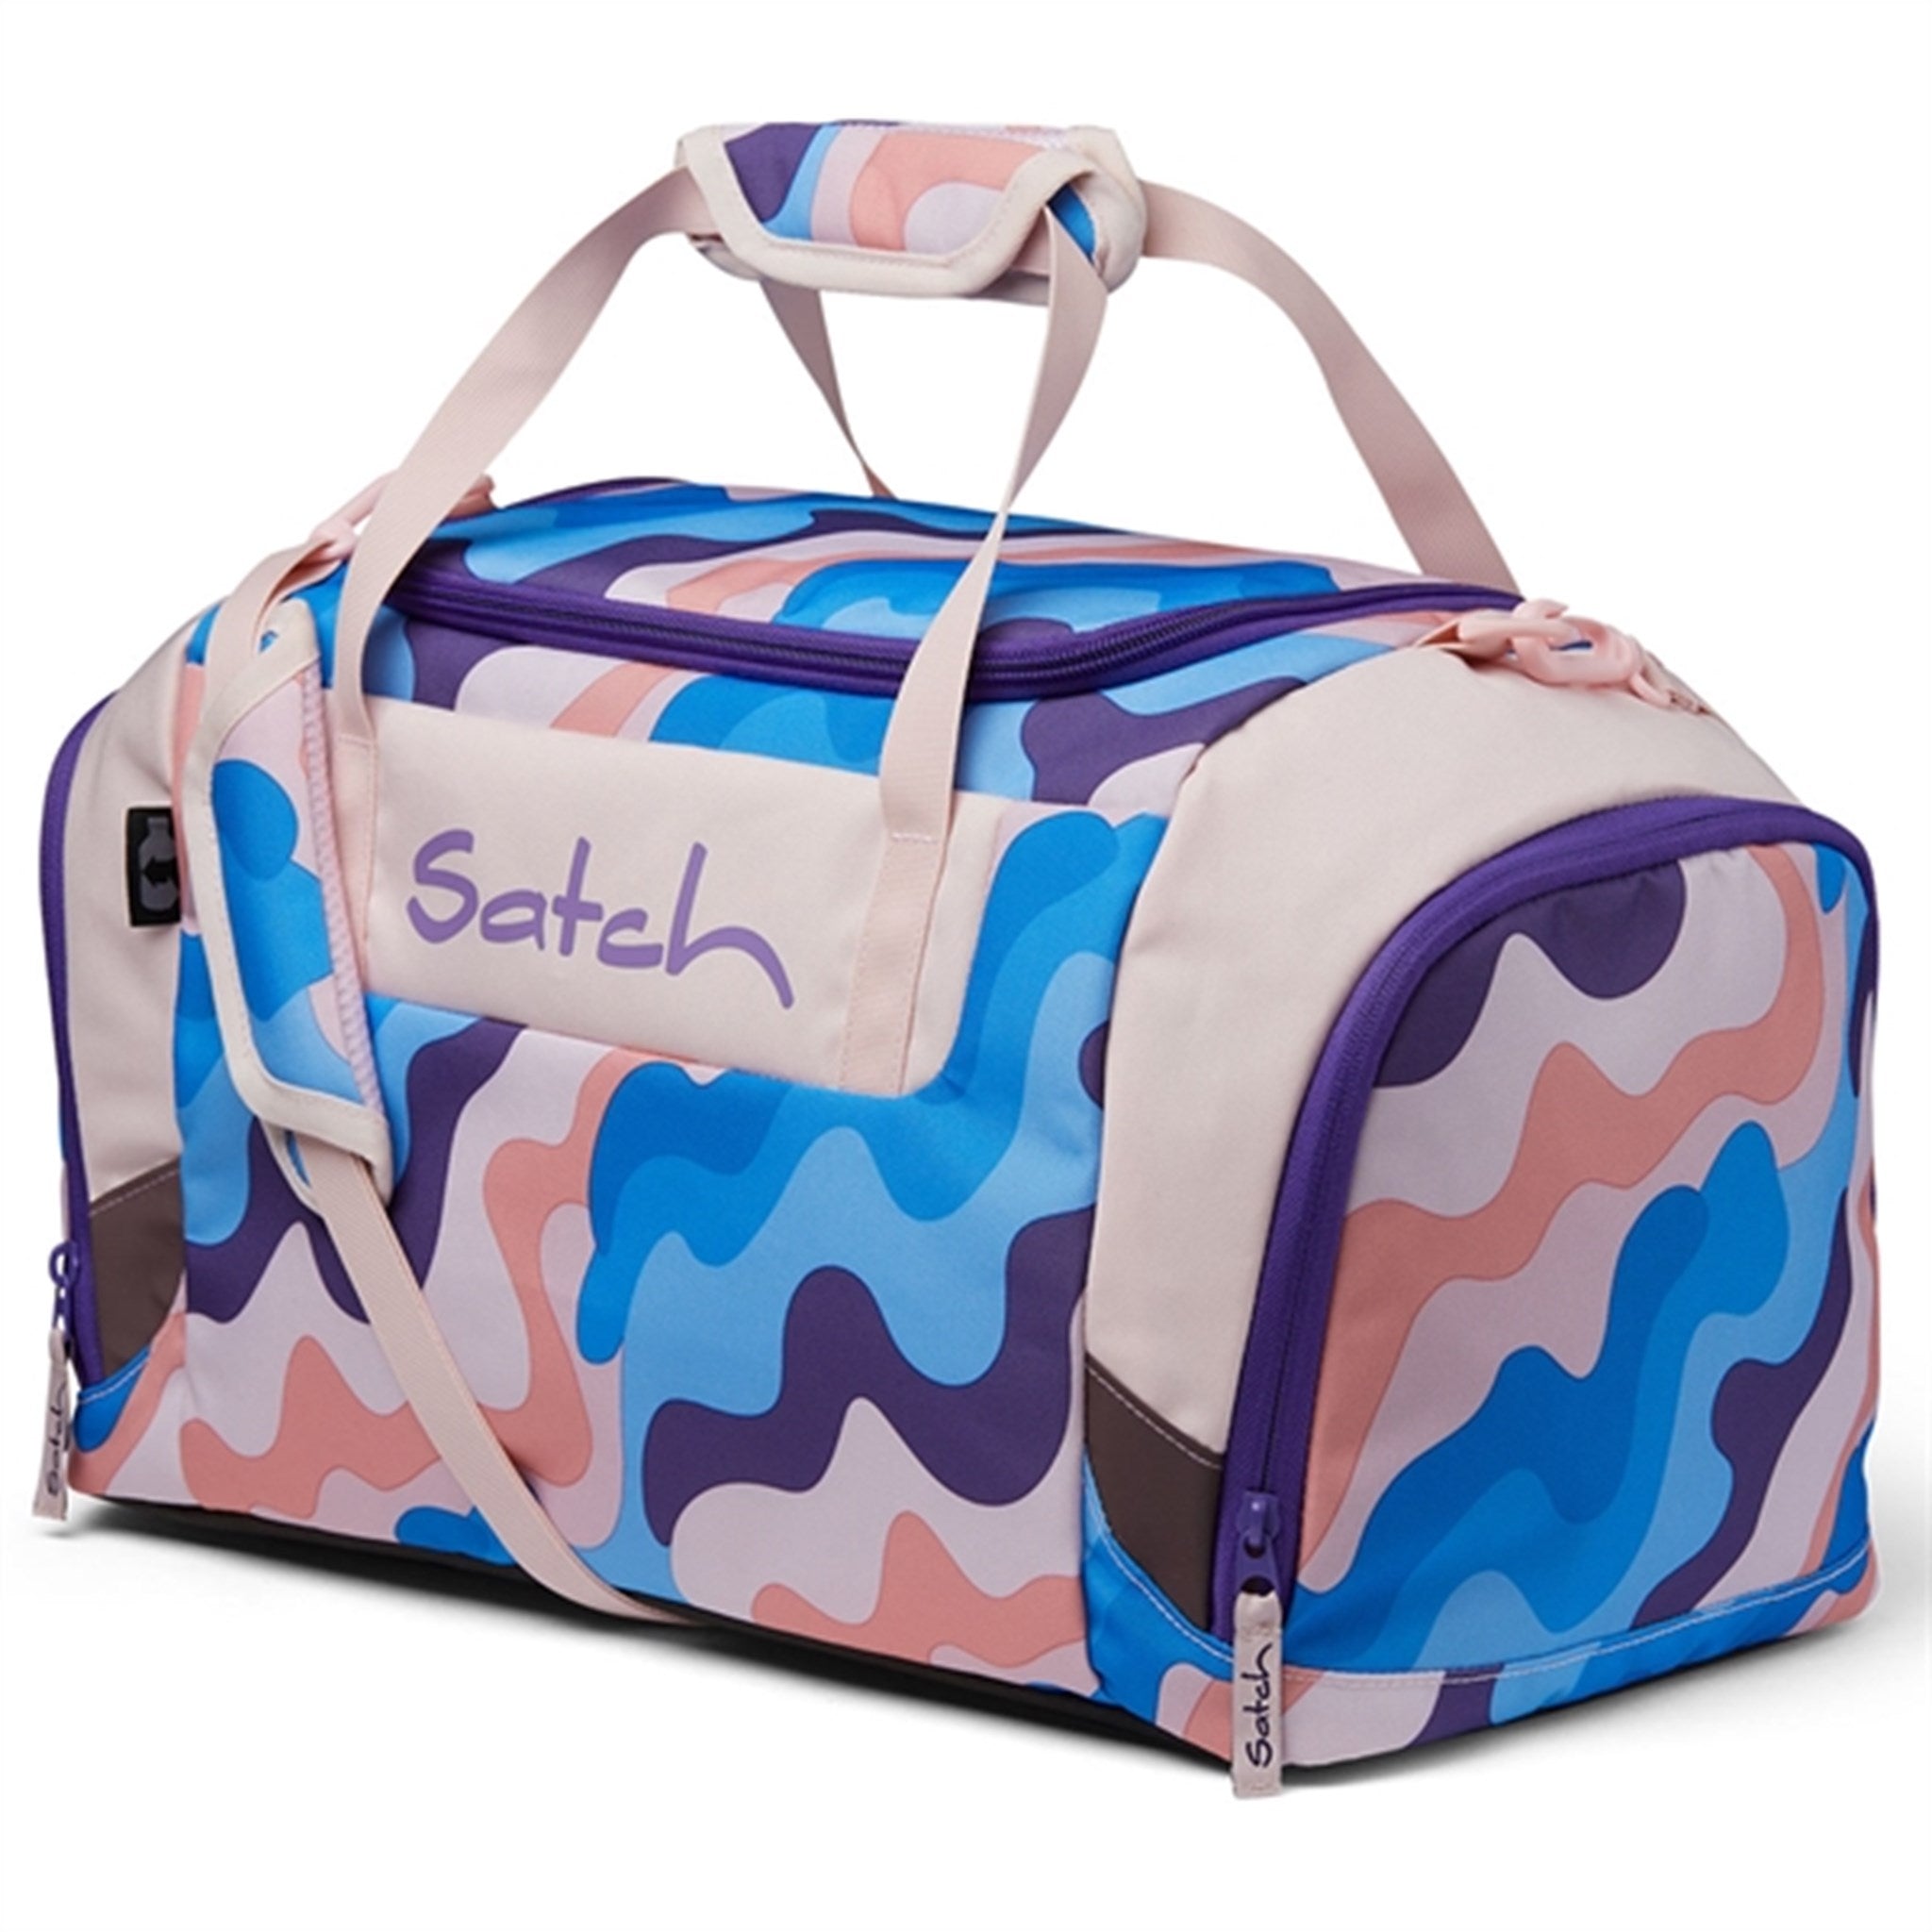 Satch Sportsbag Candy Clouds